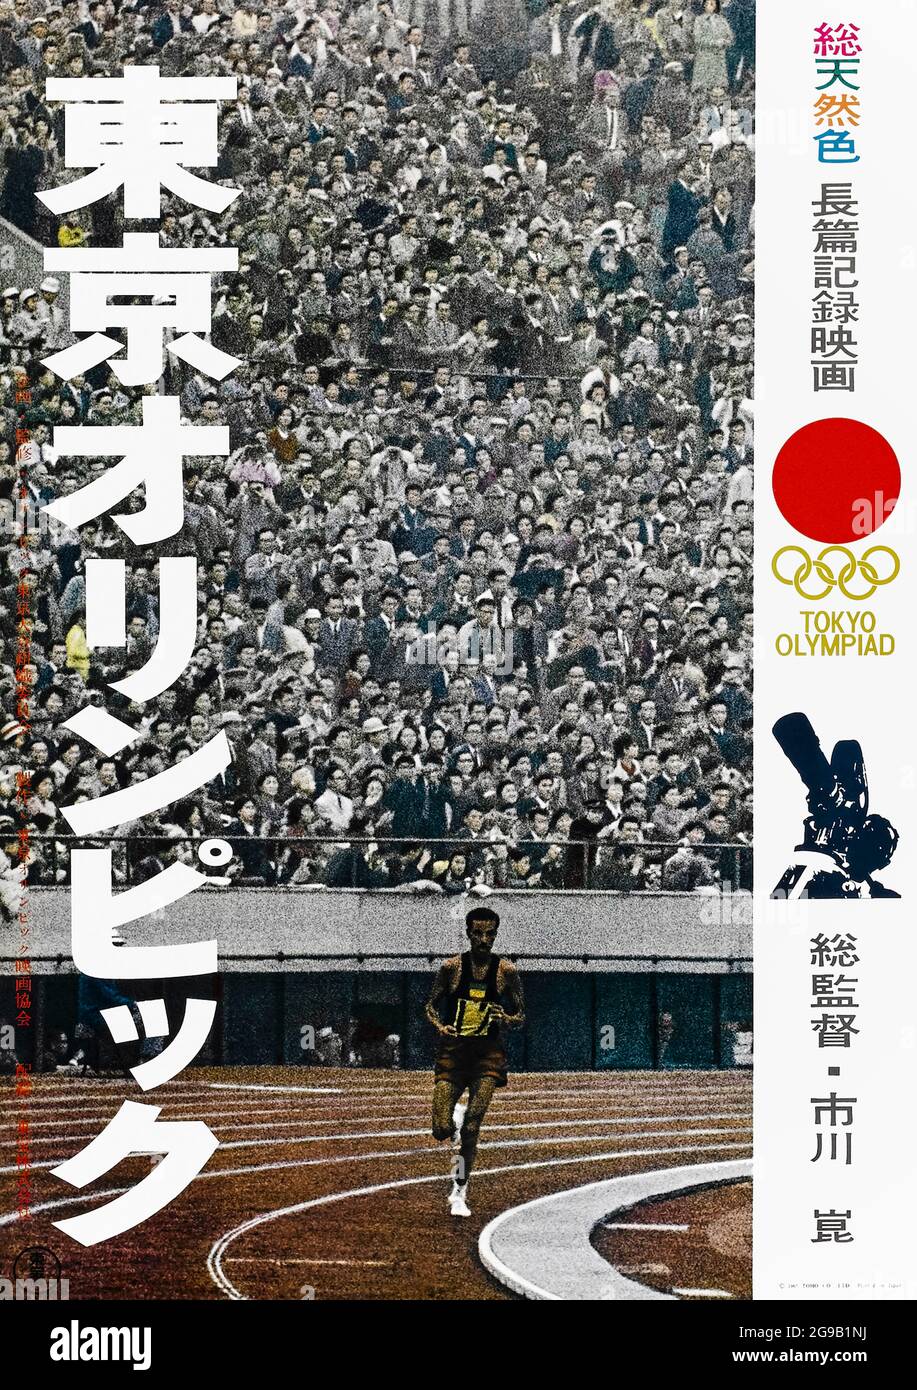 Tokyo Olympiad (1965) directed by Kon Ichikawa and starring Abebe Bikila, Jack Douglas, Ahmed Issa and Emperor Hirohito. Japanese documentary about the 1964 Summer Olympics held in Tokyo focusing on the atmosphere of the event and its participants. Stock Photo